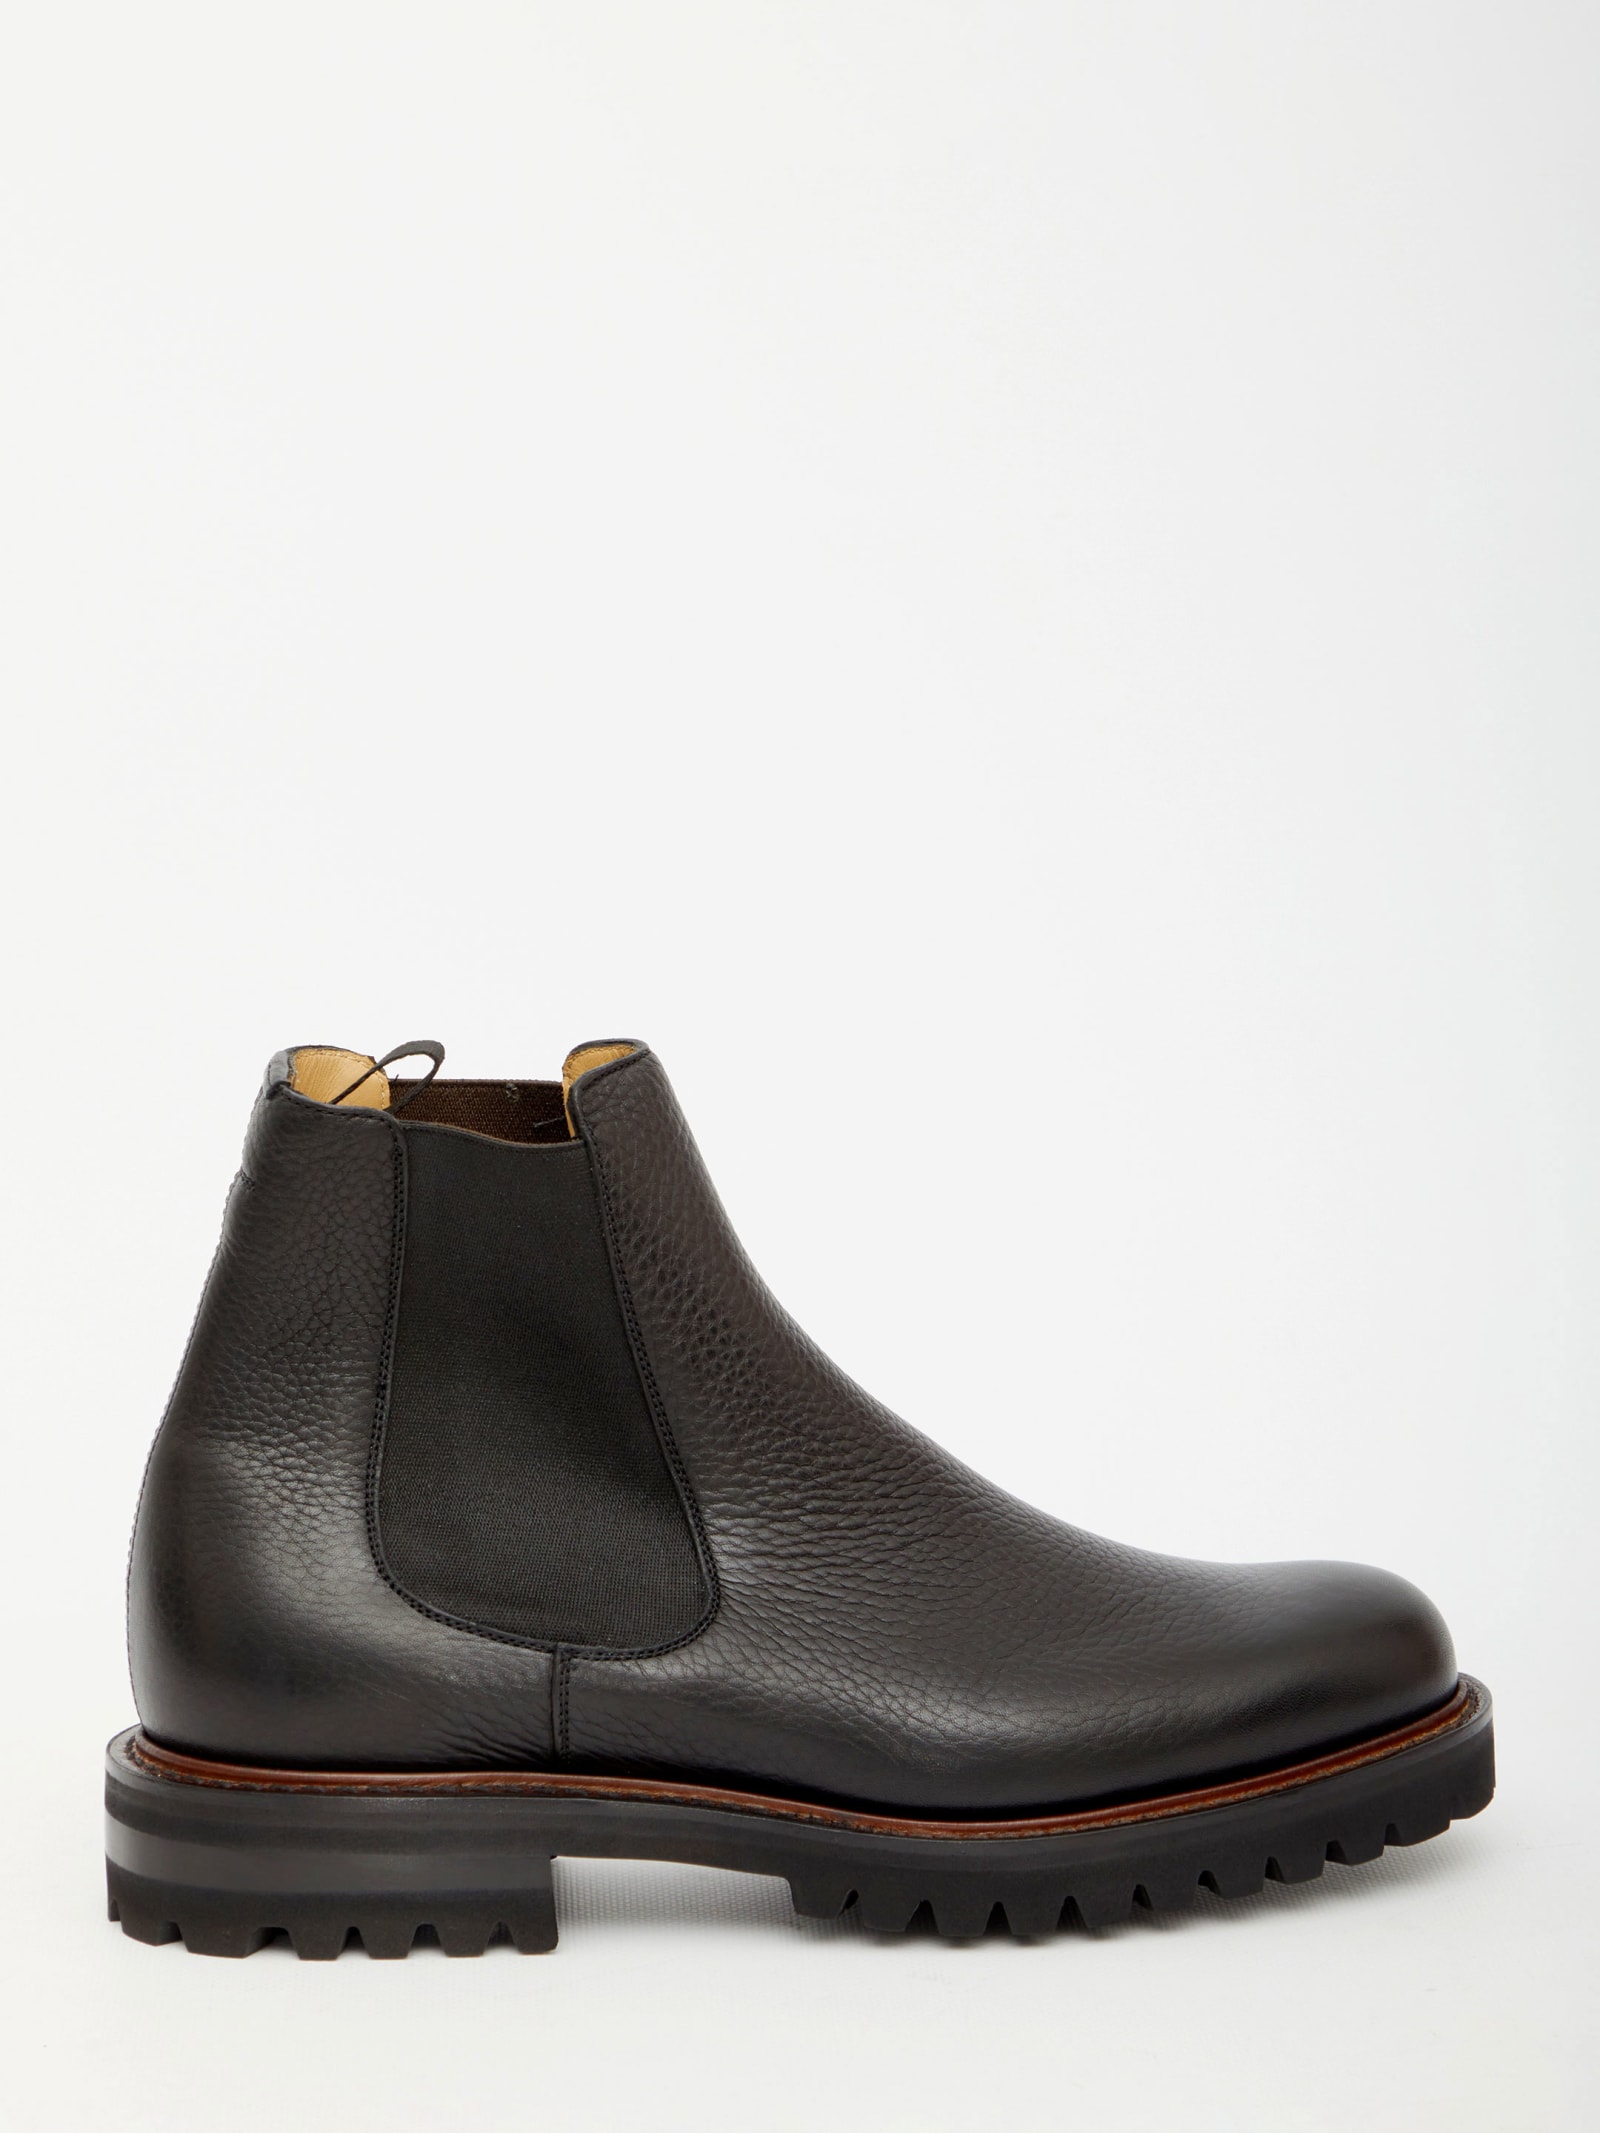 Church's Cornwood 3 Ankle Boots